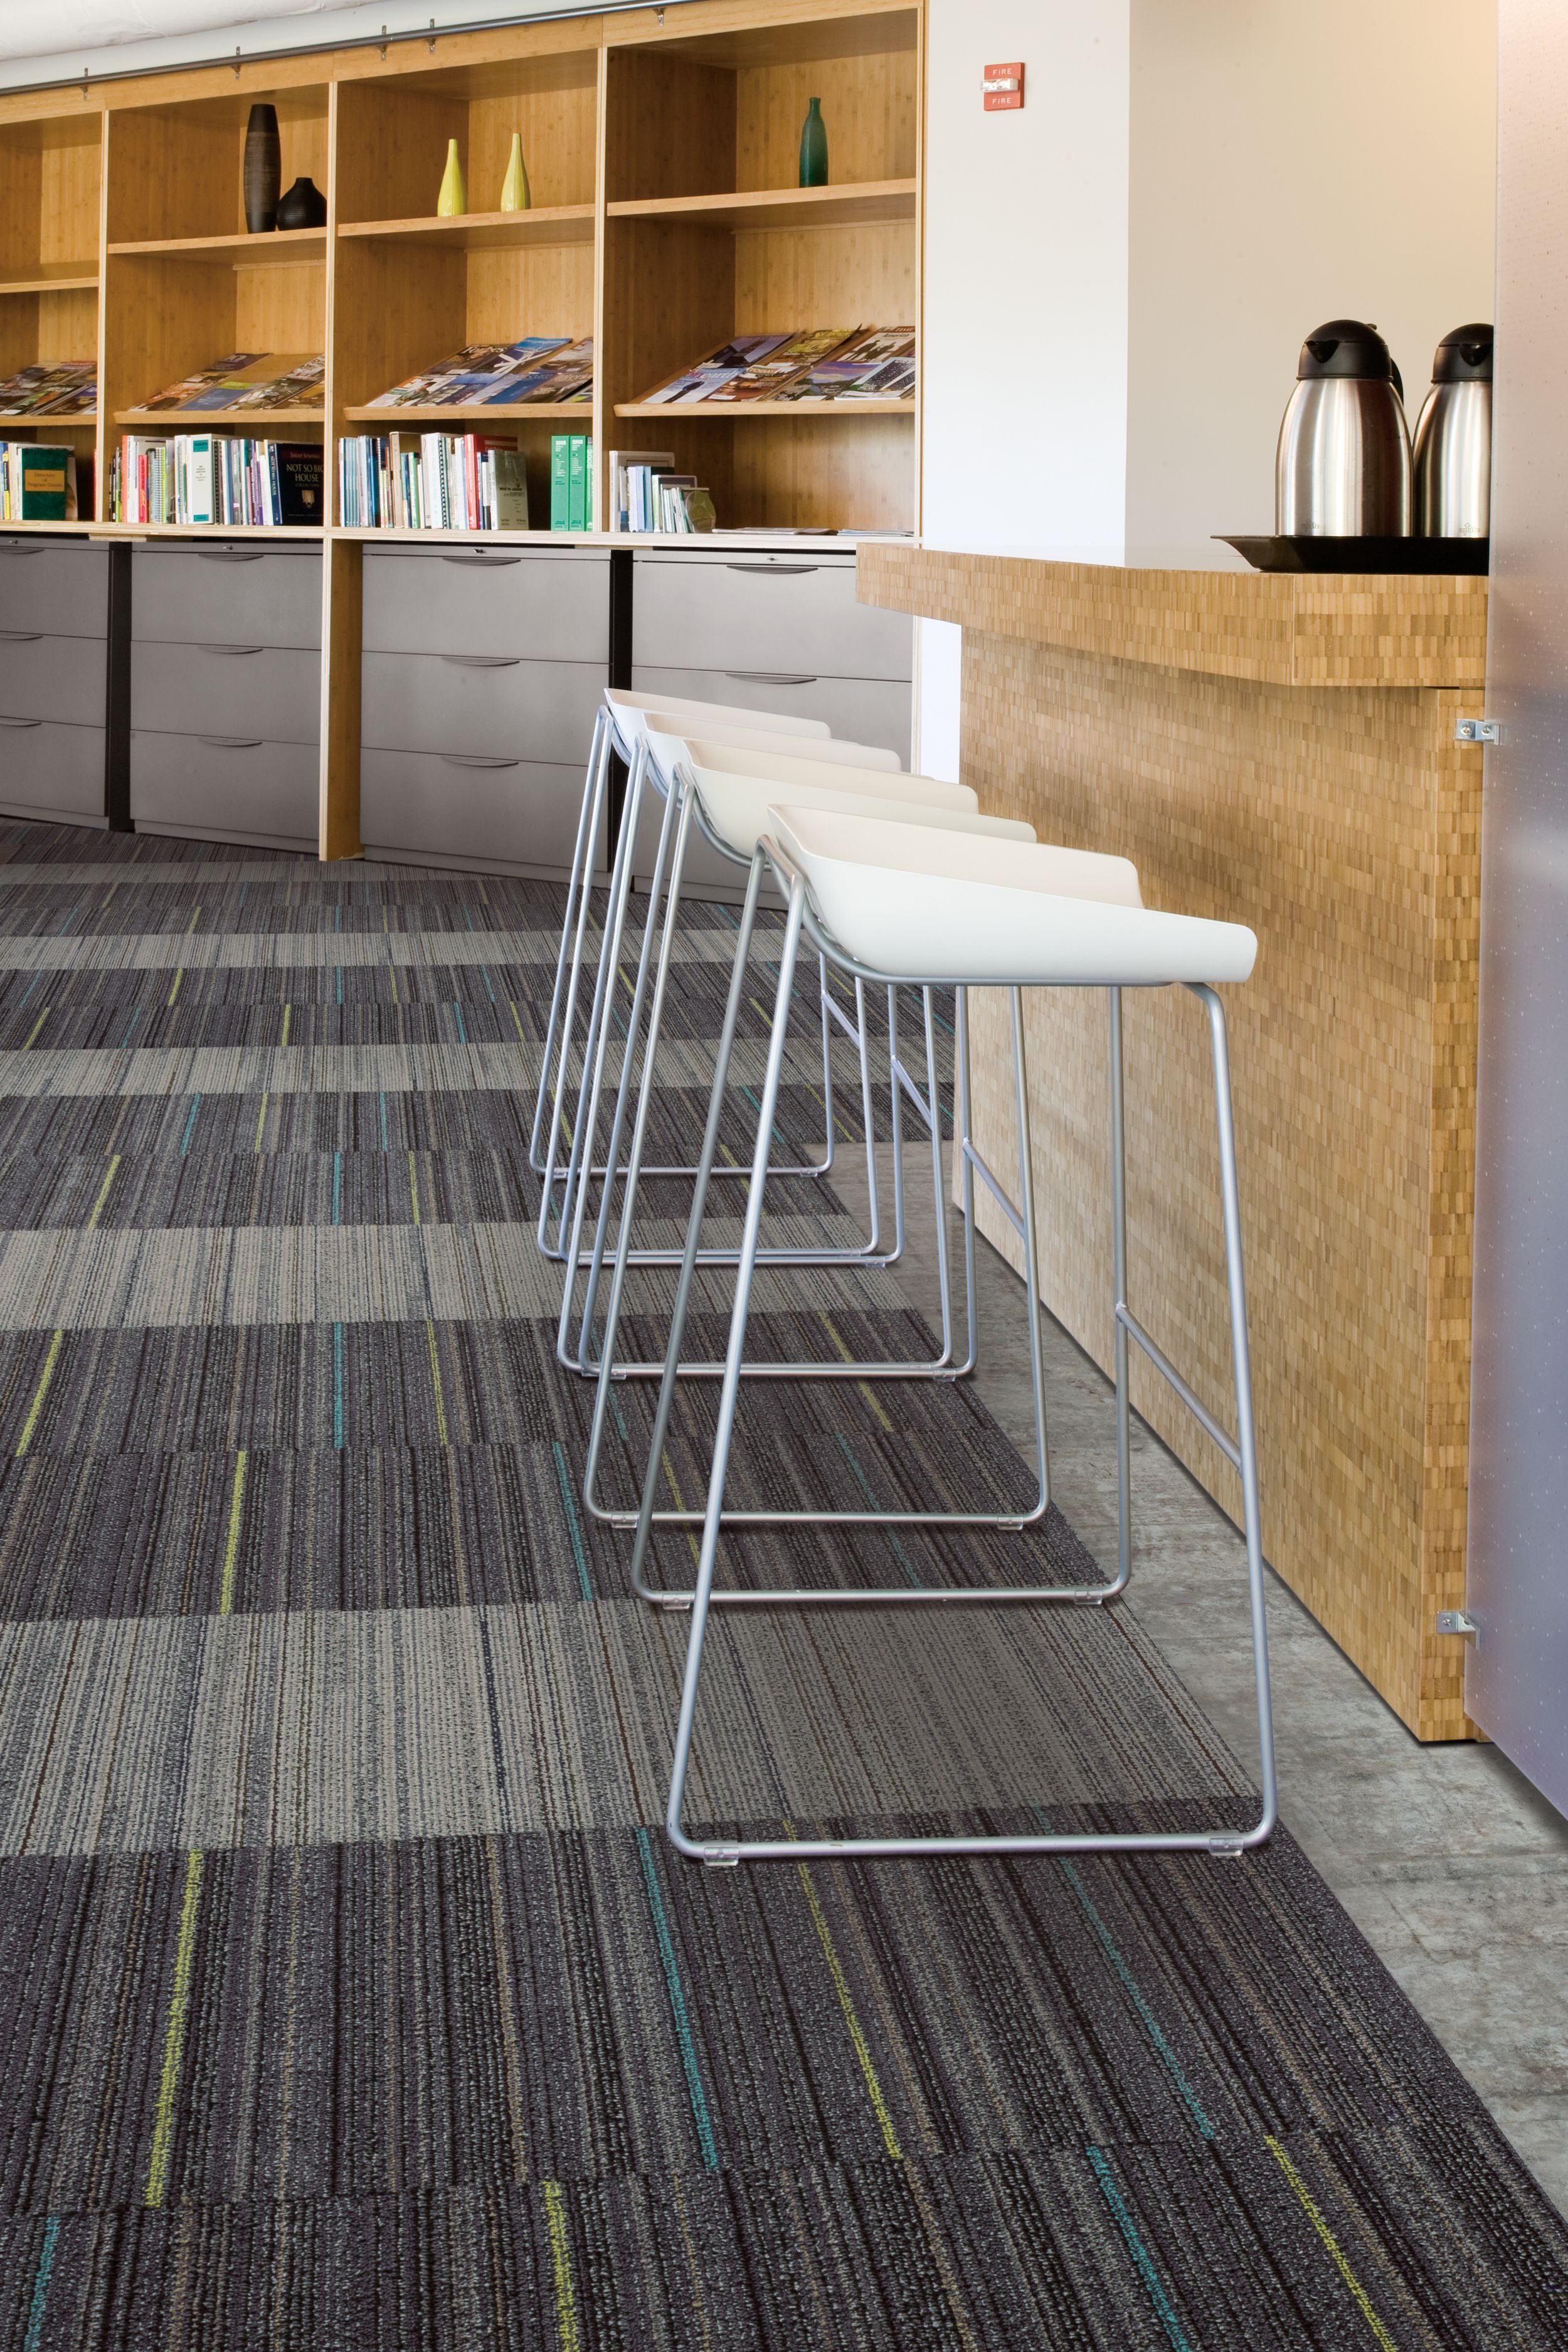 Interface Primary Stitch and Sew Straight carpet tile with Textured Stones LVT in cafe area with high top seating numéro d’image 4